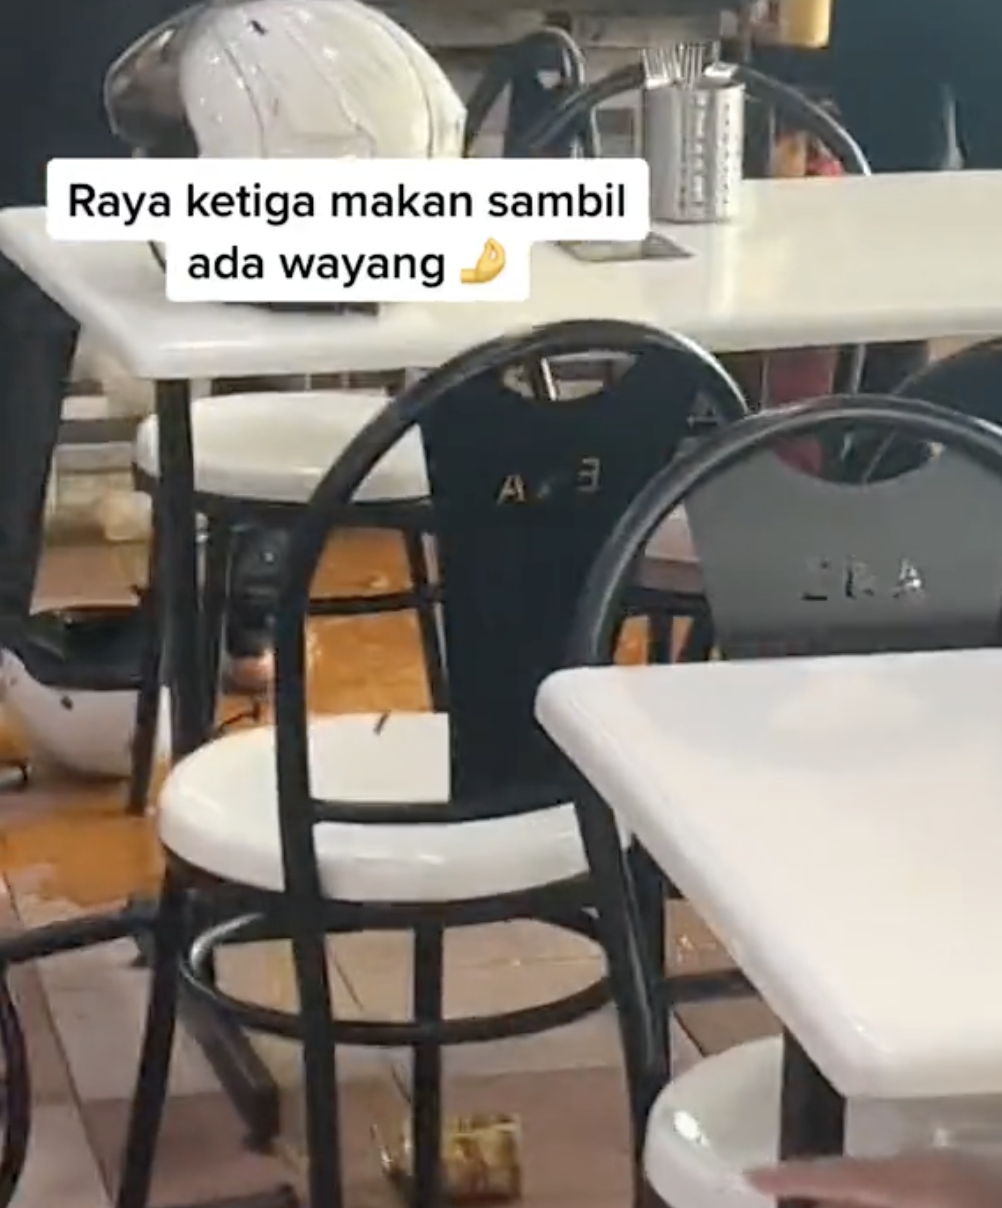 M'sian woman slams helmet & overturns curry container at pj mamak over delayed delivery order | weirdkaya